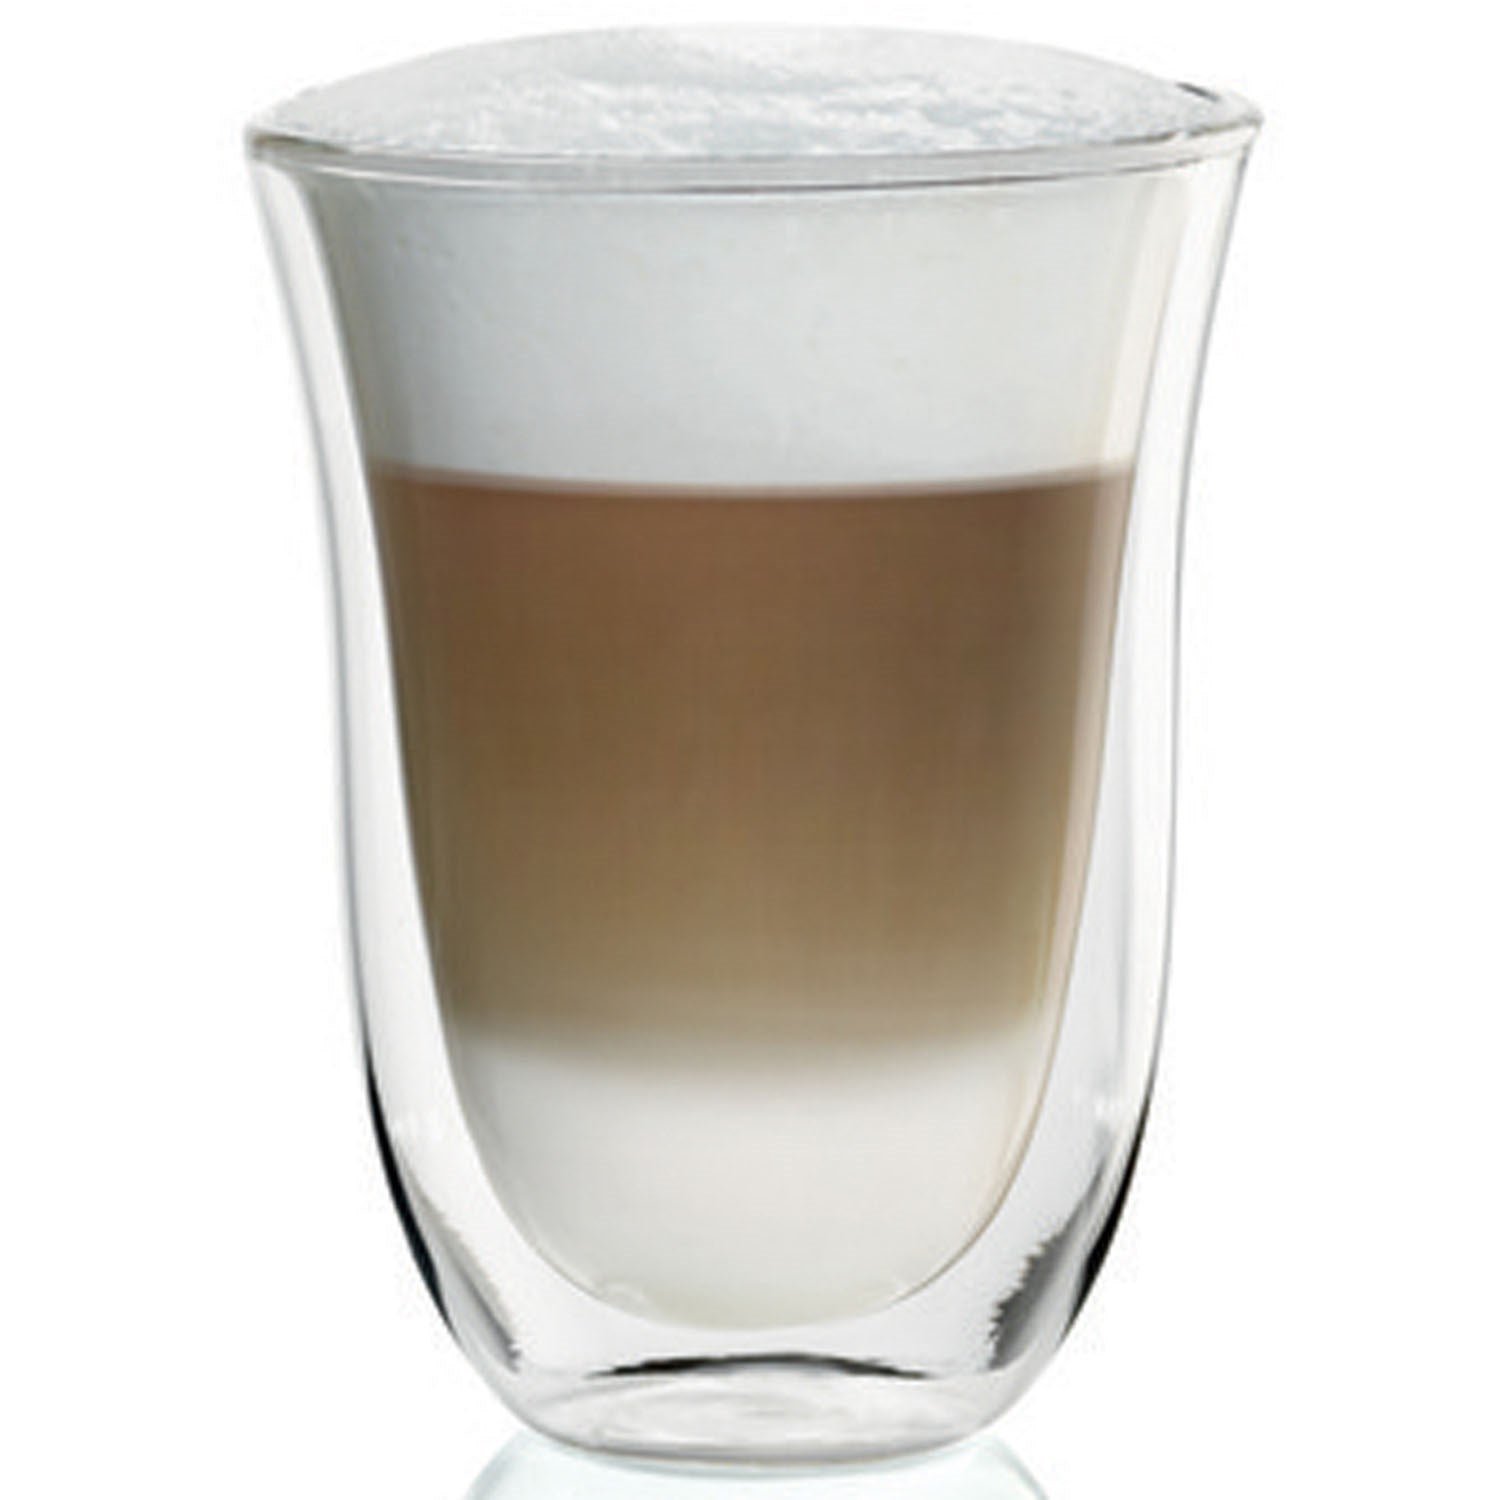 De'Longhi DeLonghi Double Walled Thermo Latte Glasses, Set of 2, 2 Count  (Pack of 1), Clear, 330 milliliters